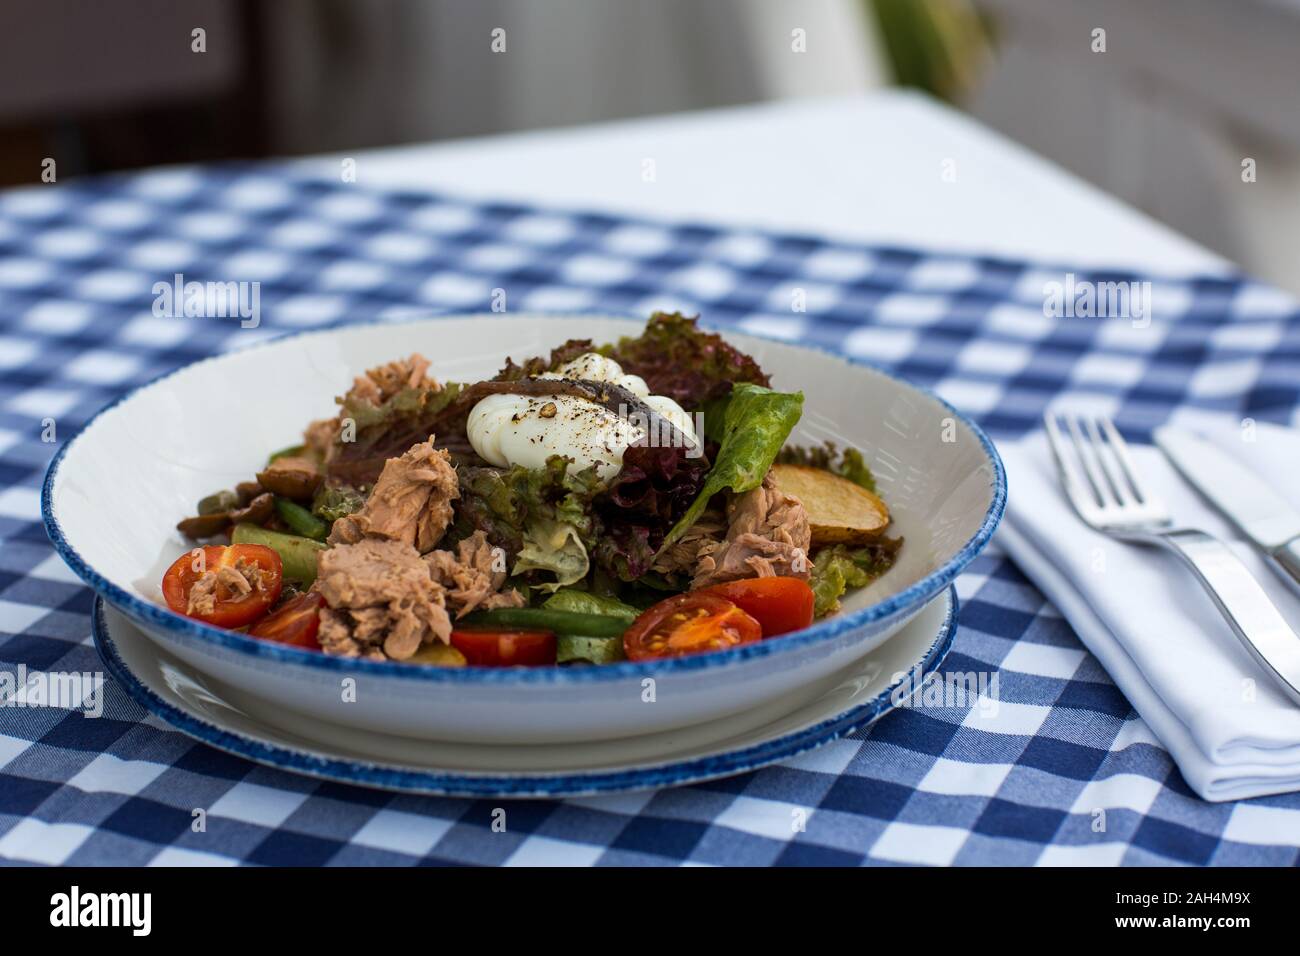 Nicoise salad in a plate on the table daylight Stock Photo